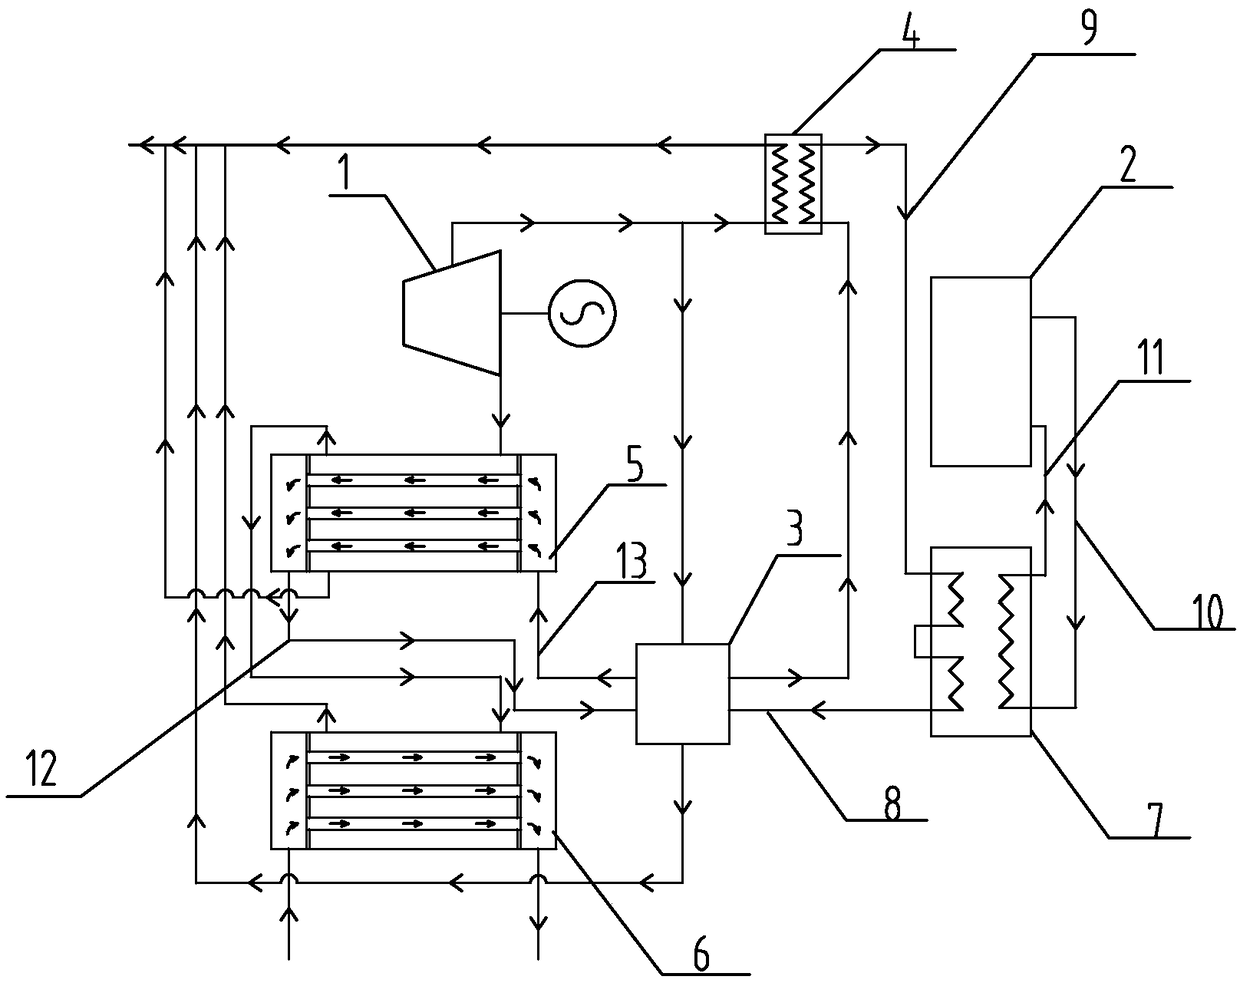 Large-temperature-difference centralized heat supply system adopting double condensers